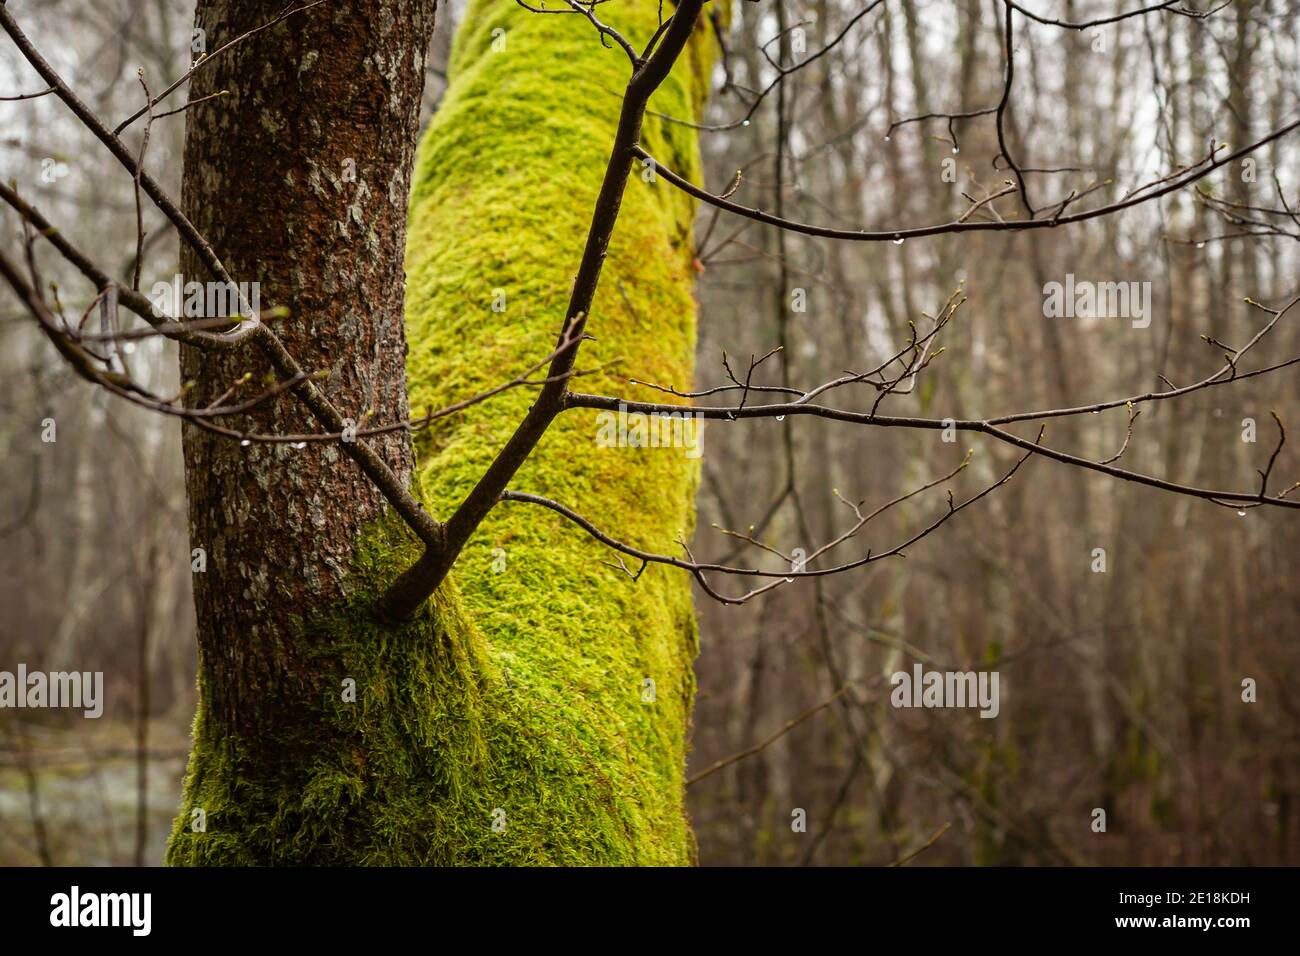 Water droplets on brunch of bright green mossy tree Stock Photo